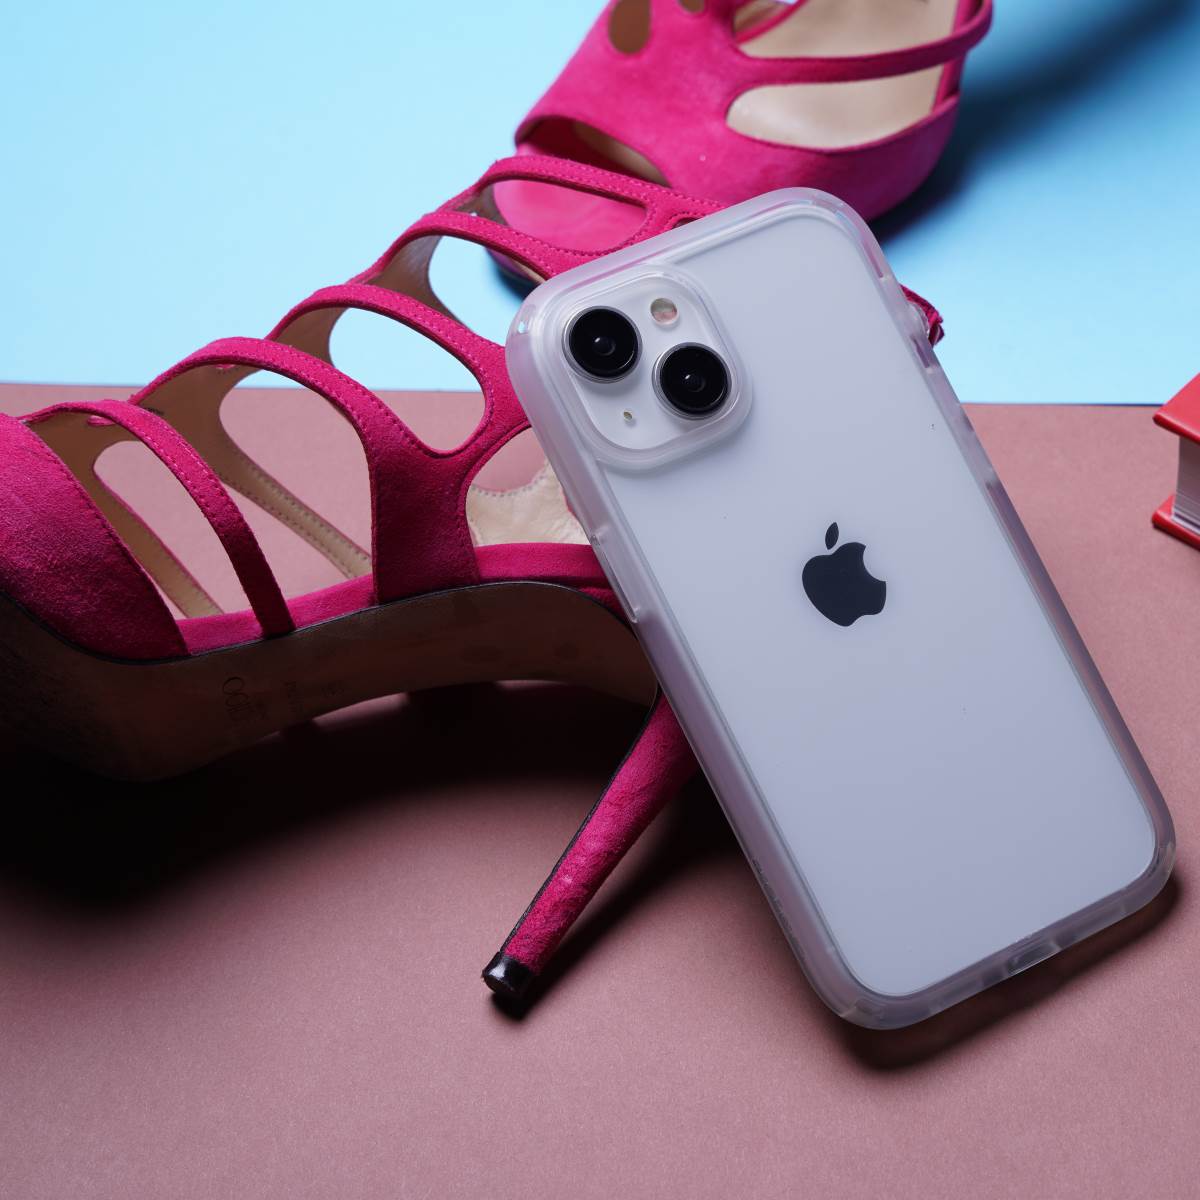  Catalyst-iPhone-15-protective-stylish-drop-proof-iphone-cases-with-hot-pink-Jimmy-Choo-sandals.jpg 